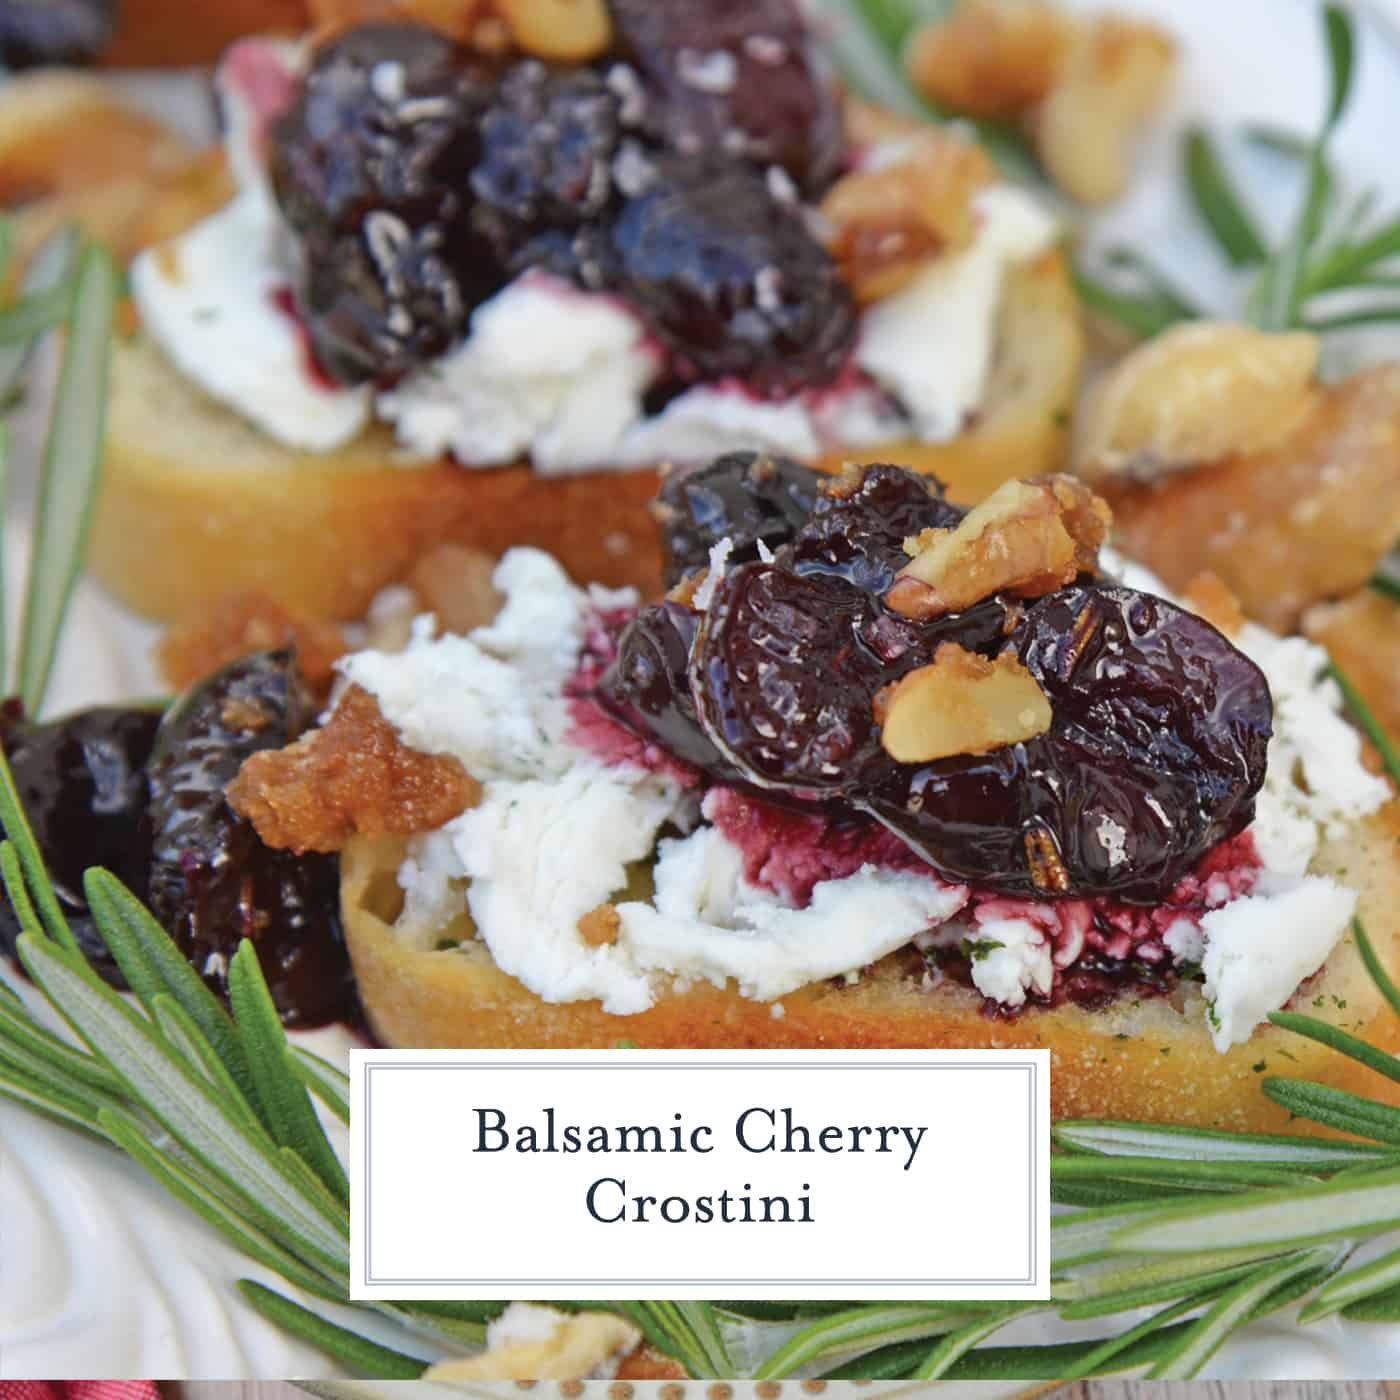 Balsamic Cherry Crostini are an easy appetizer using goat cheese and a tangy cherry balsamic reduction. The perfect holiday appetizer recipe! #crostinirecipes #goatcheeserecipes #easyappetizerrecipes www.savoryexperiments.com